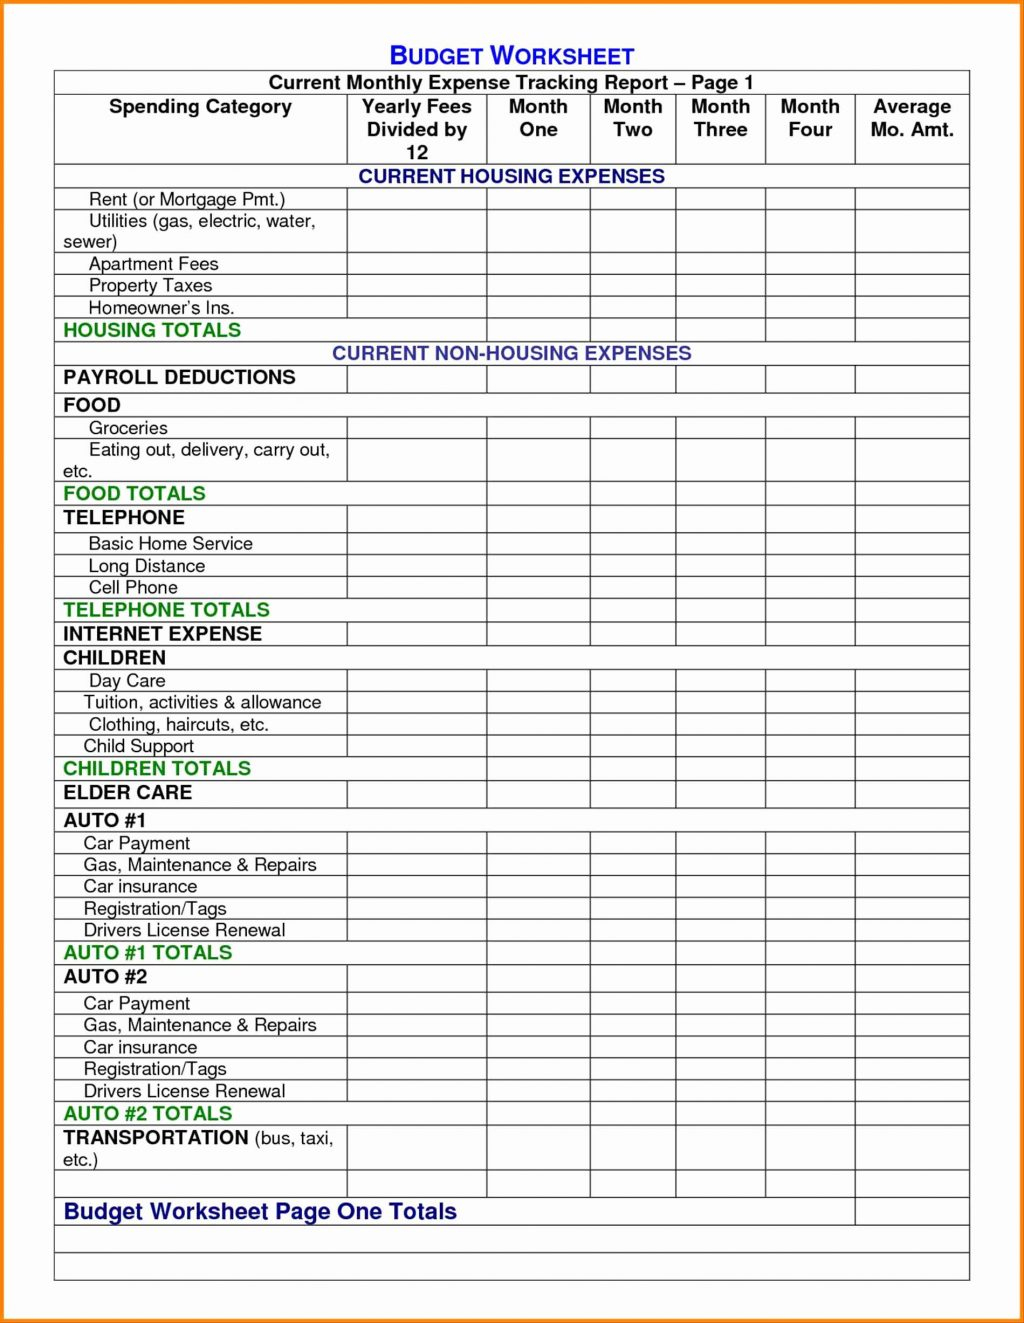 Farm Accounting Spreadsheet Free For Templates Small Business Of Inside Farm Accounting Spreadsheet